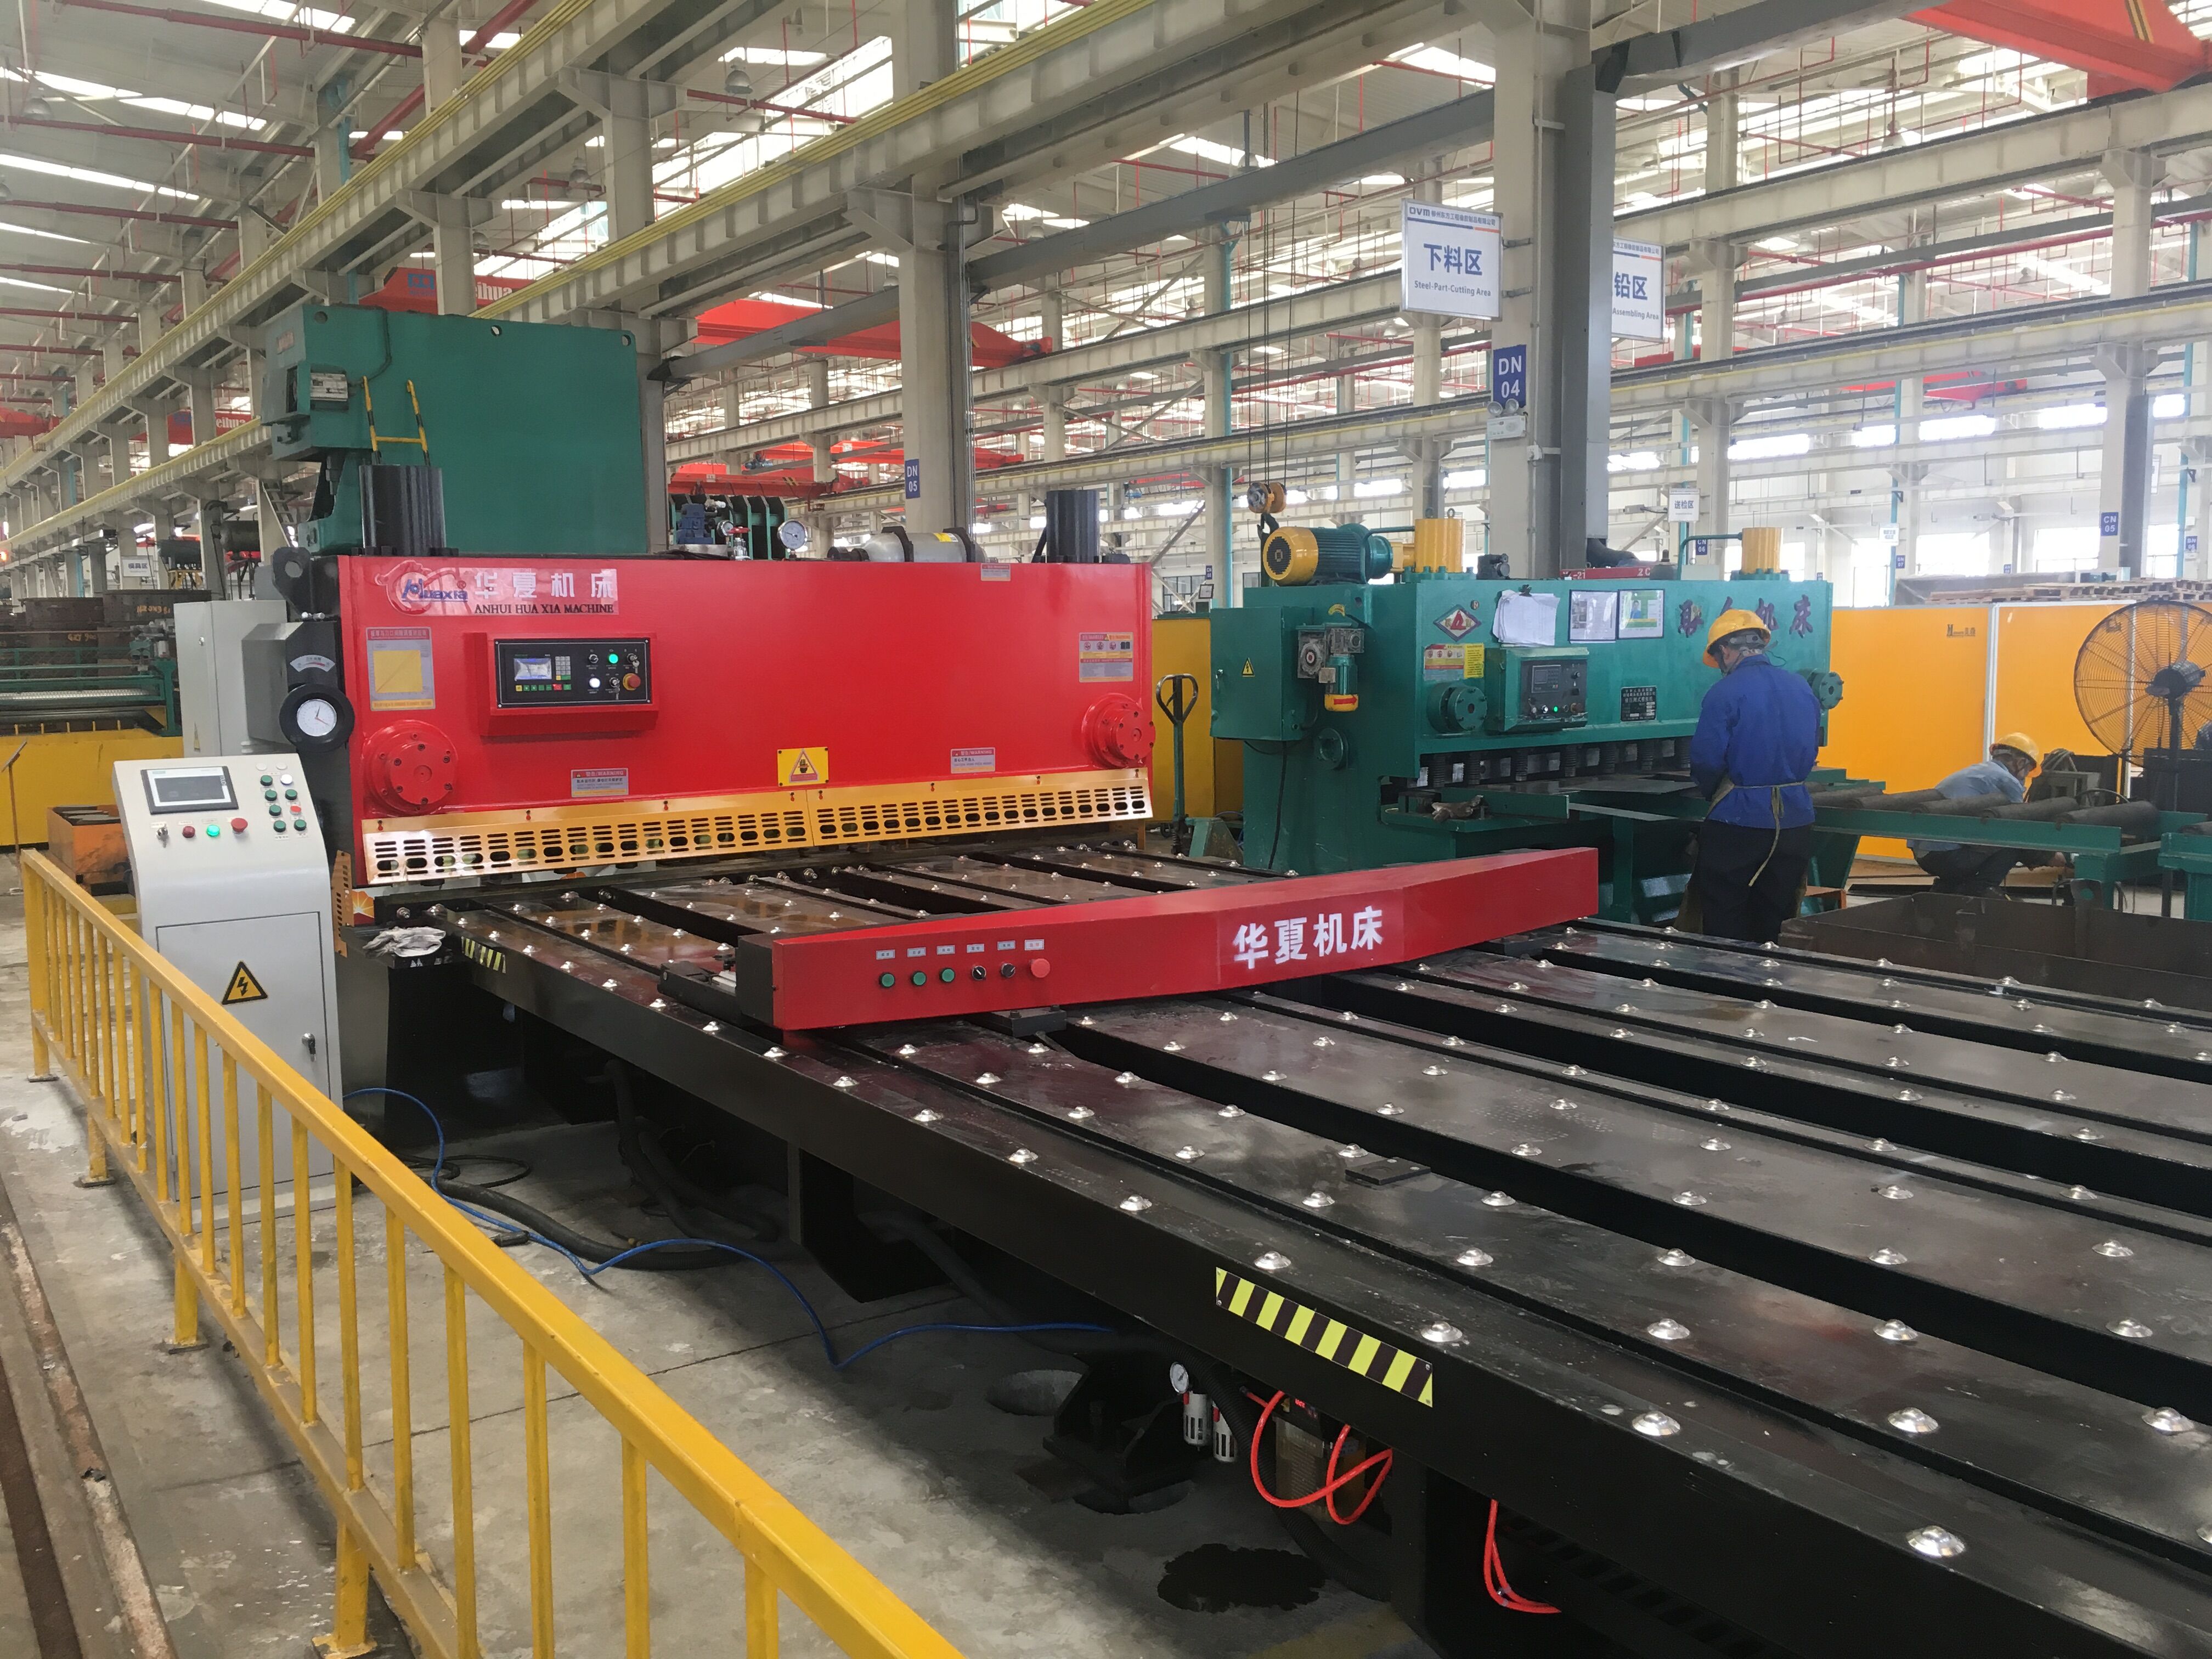 HYDRAULIC GUILLOTINE SHEARING MACHINE WITH FEEDING SYSTEM